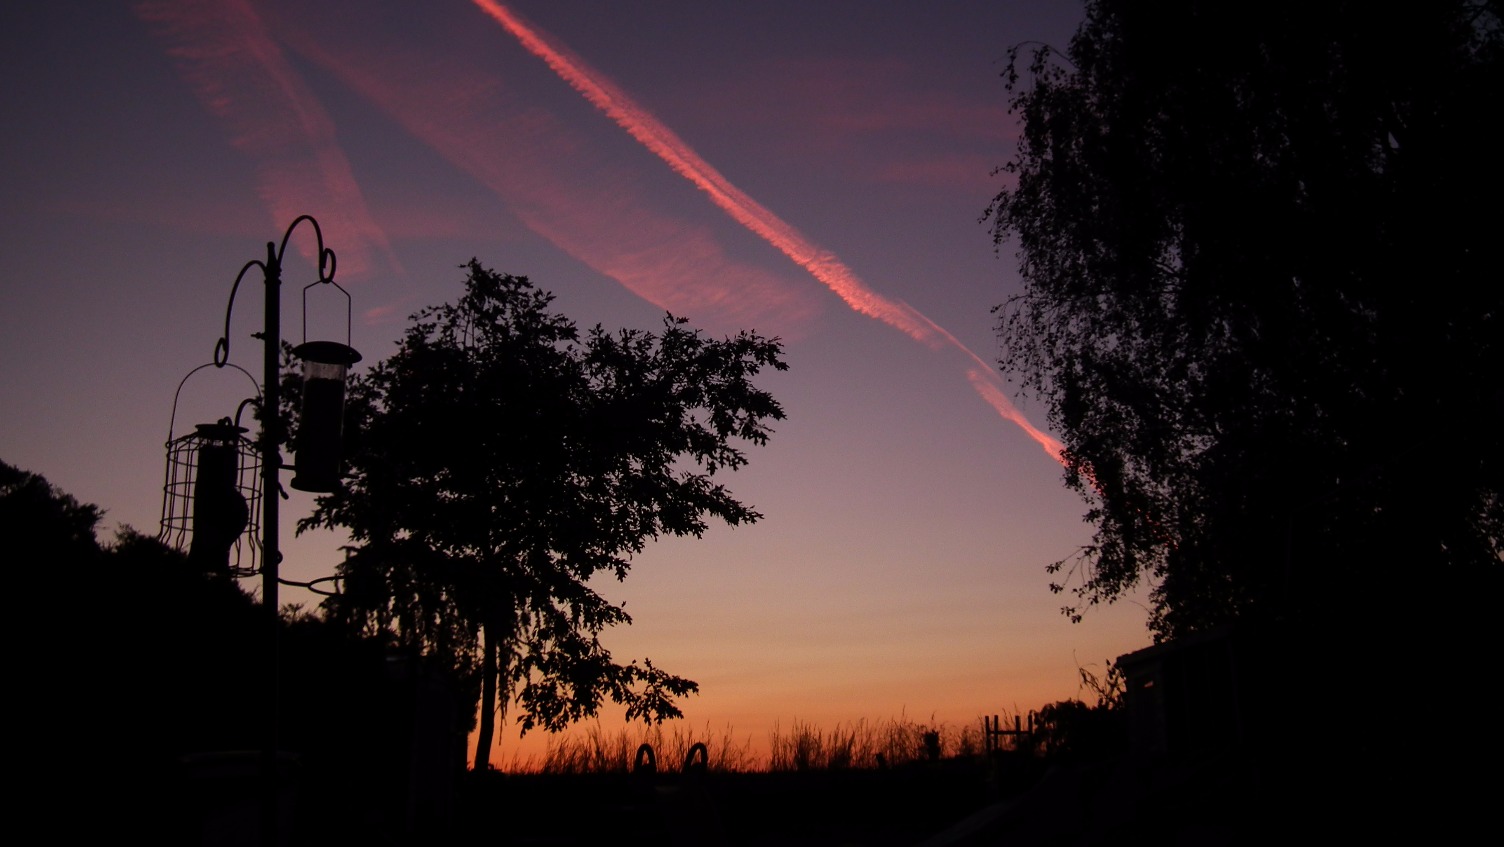 Sunset Trail - Scenery, Plane | Planet | Sky | Red | Pink | Evening | Black | Garden